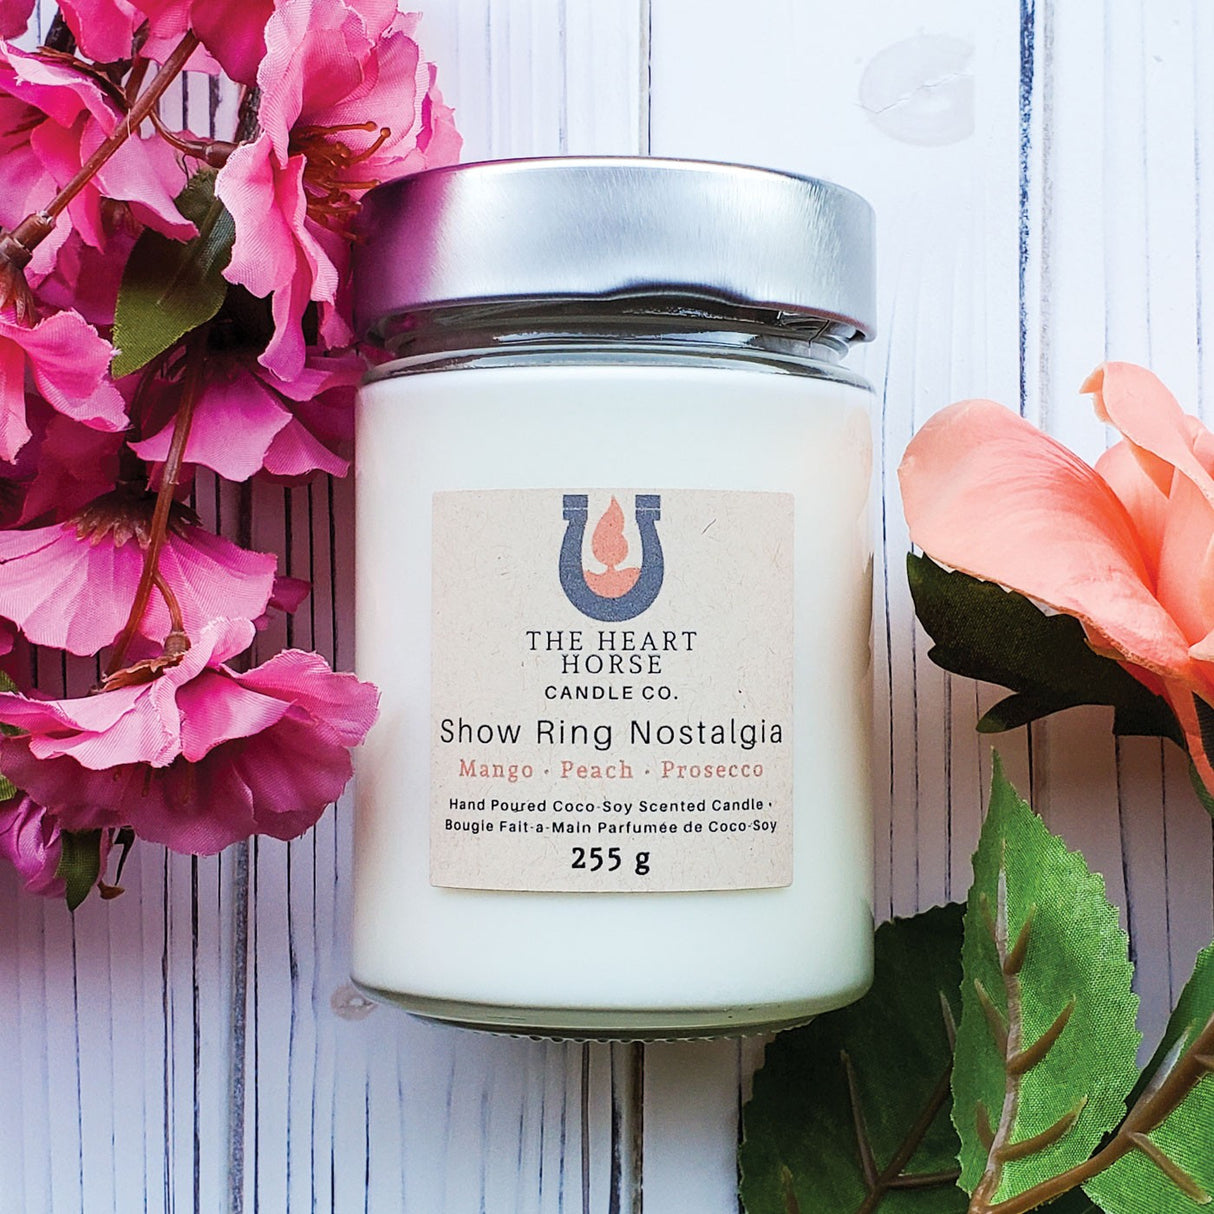 The Heart Horse Candle Co. Show Ring Nostalgia Candle